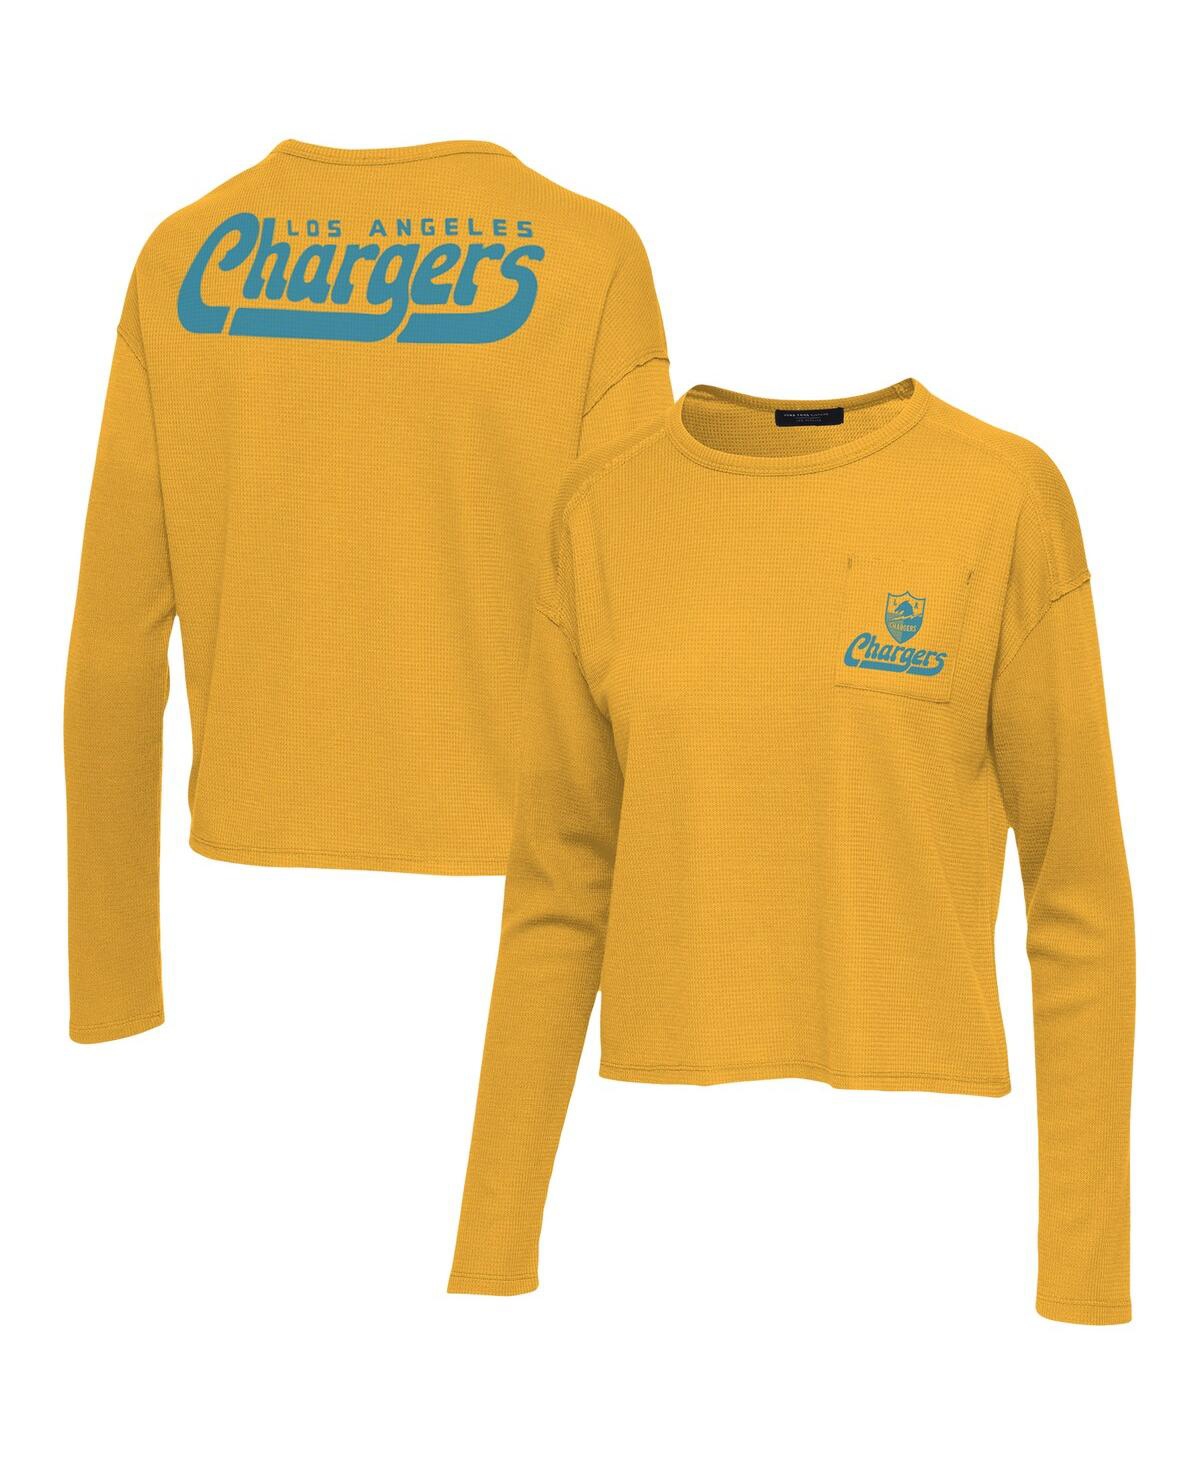 Women's Junk Food Gold Los Angeles Chargers Pocket Thermal Long Sleeve T-shirt - Gold